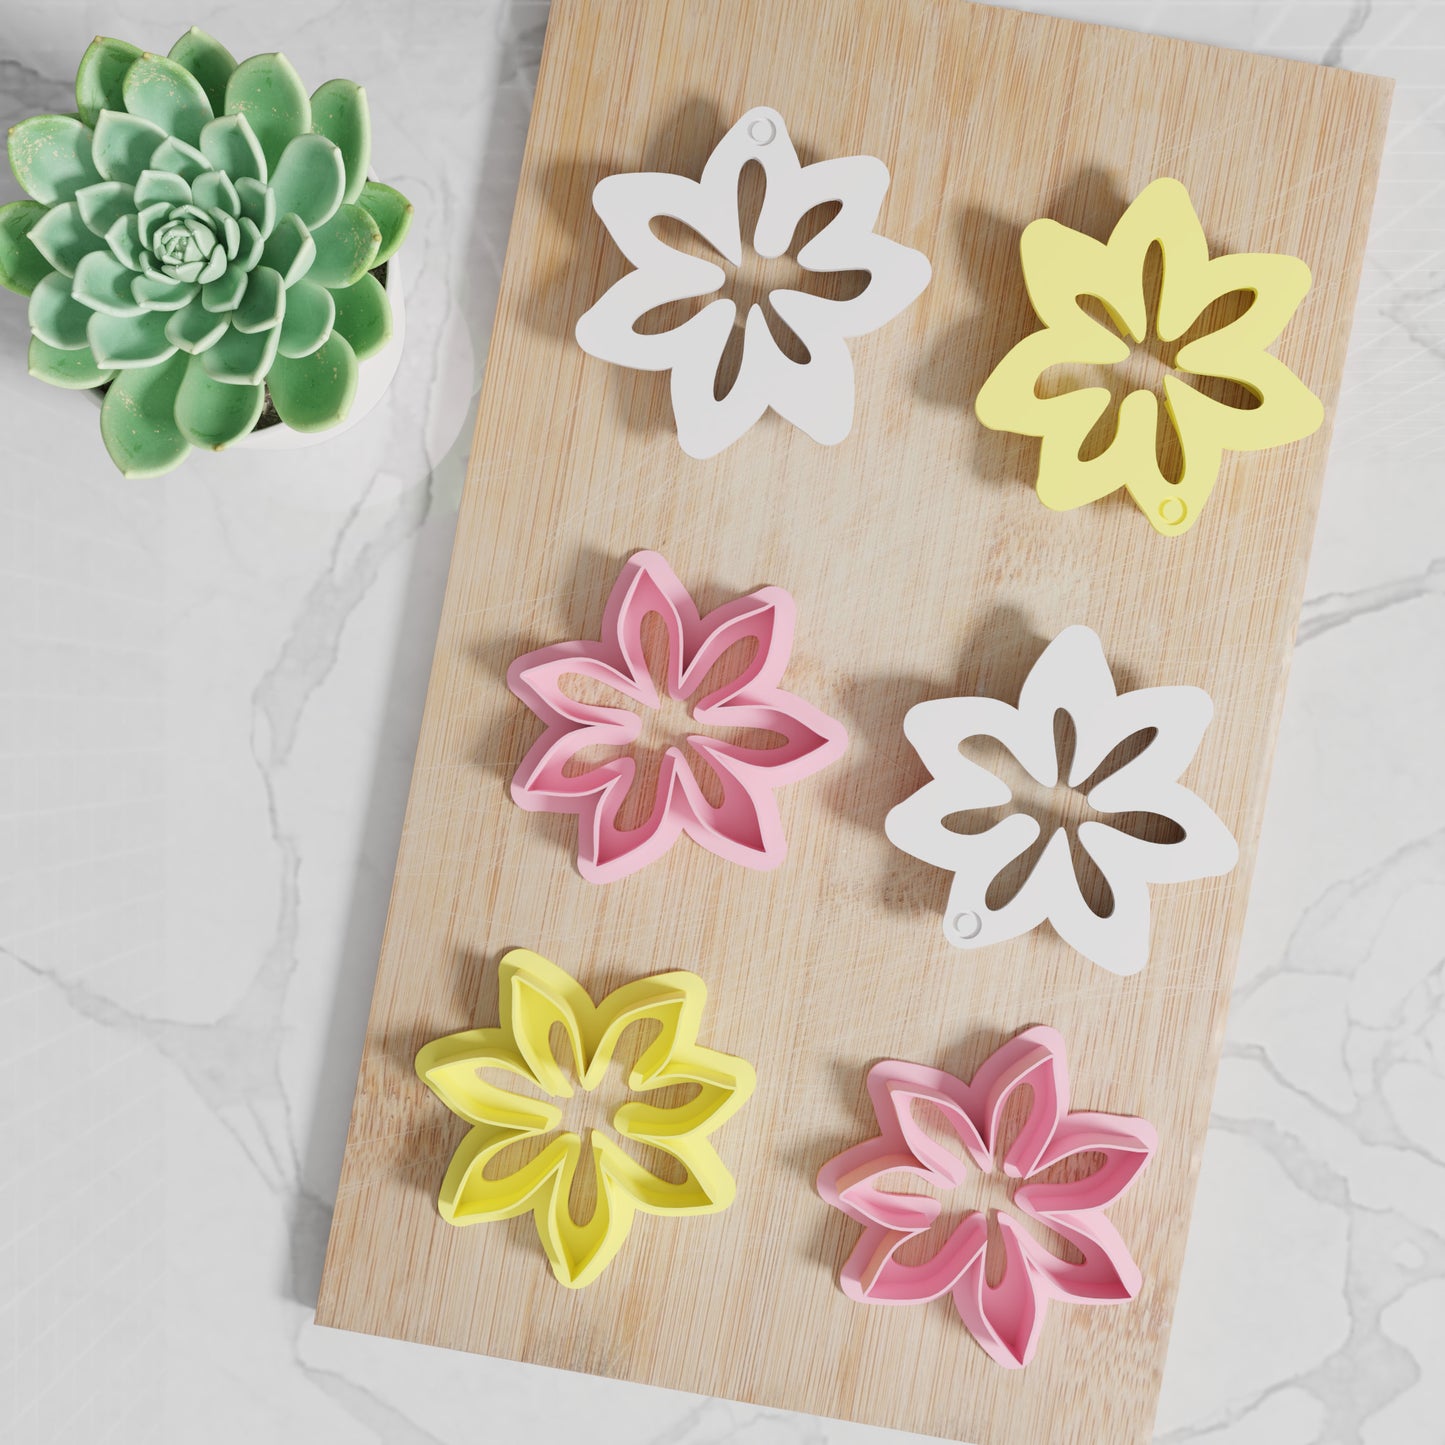 Easter Lily Cookie Cutter Set. Matches Others In Our Easter Collection. Modern Stylish Easter Lilly Cookie Cutter